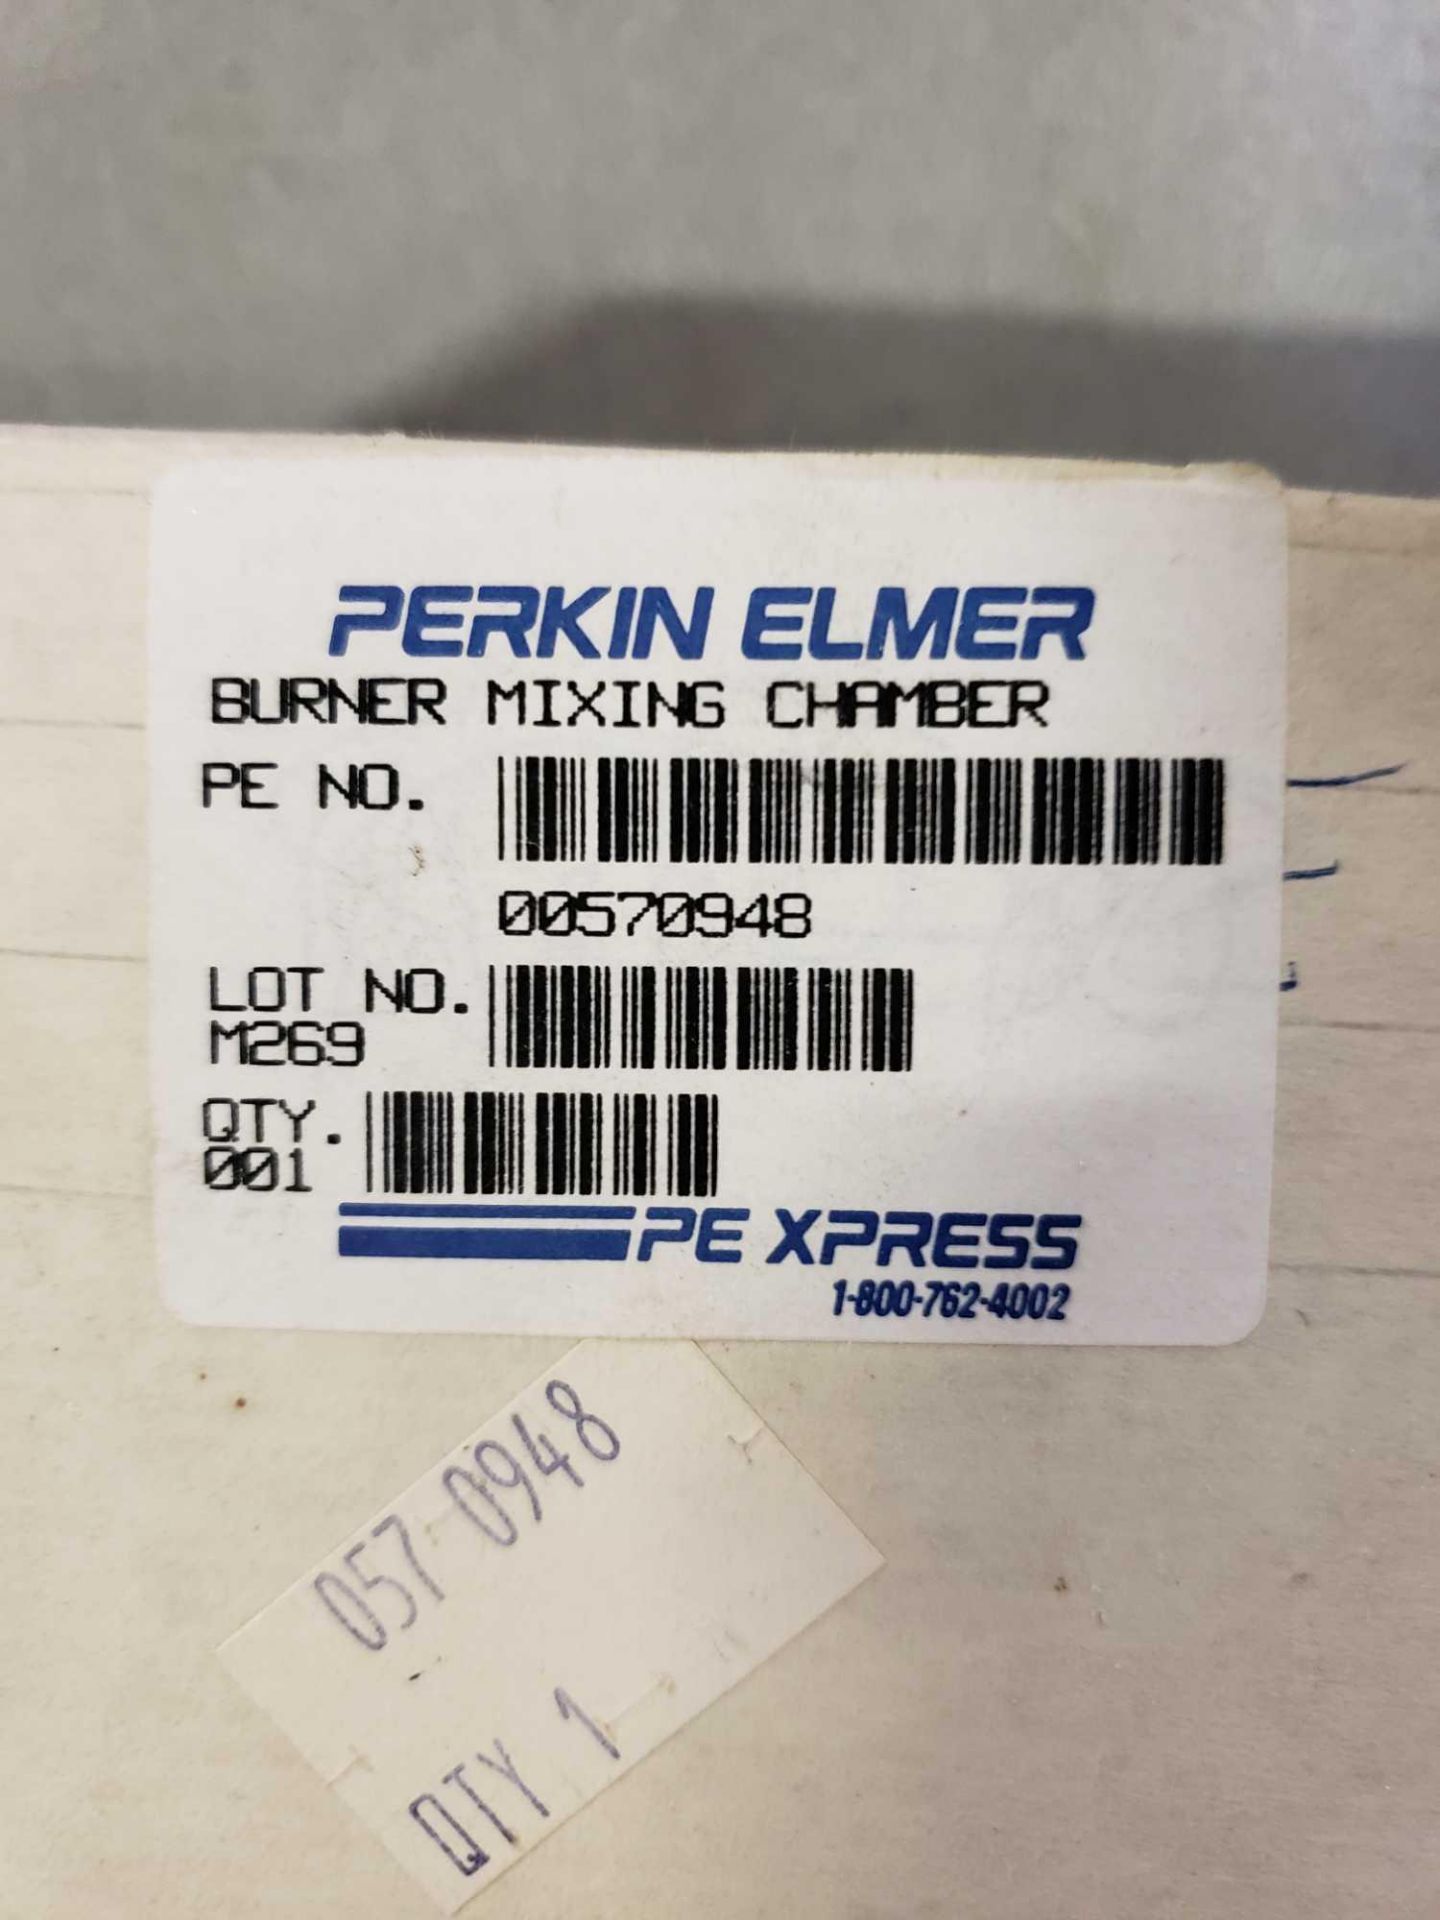 Perkin Elmer Part number 00570948 and N305-0615. - Image 5 of 6